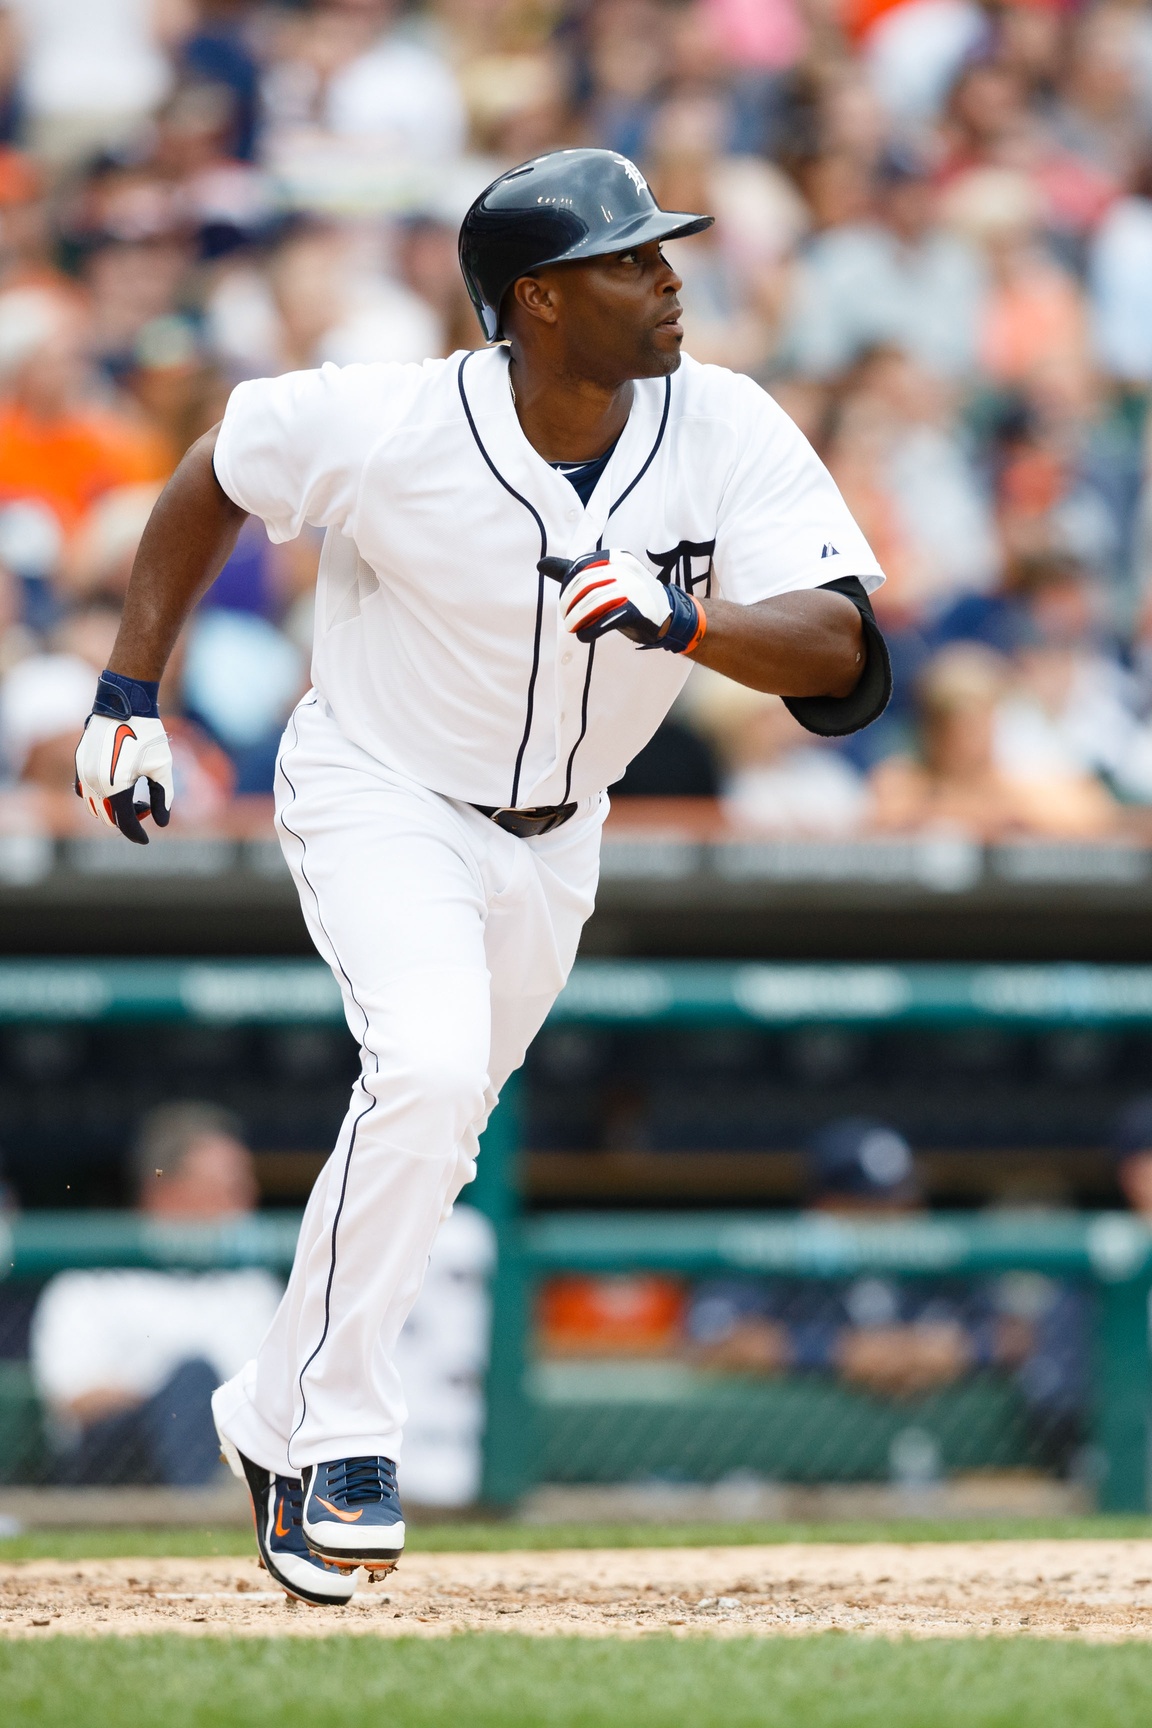 Can Torii Hunter and the Tigers win the AL Central? Photo by Rick Osentoski, USA Today Sports Images.